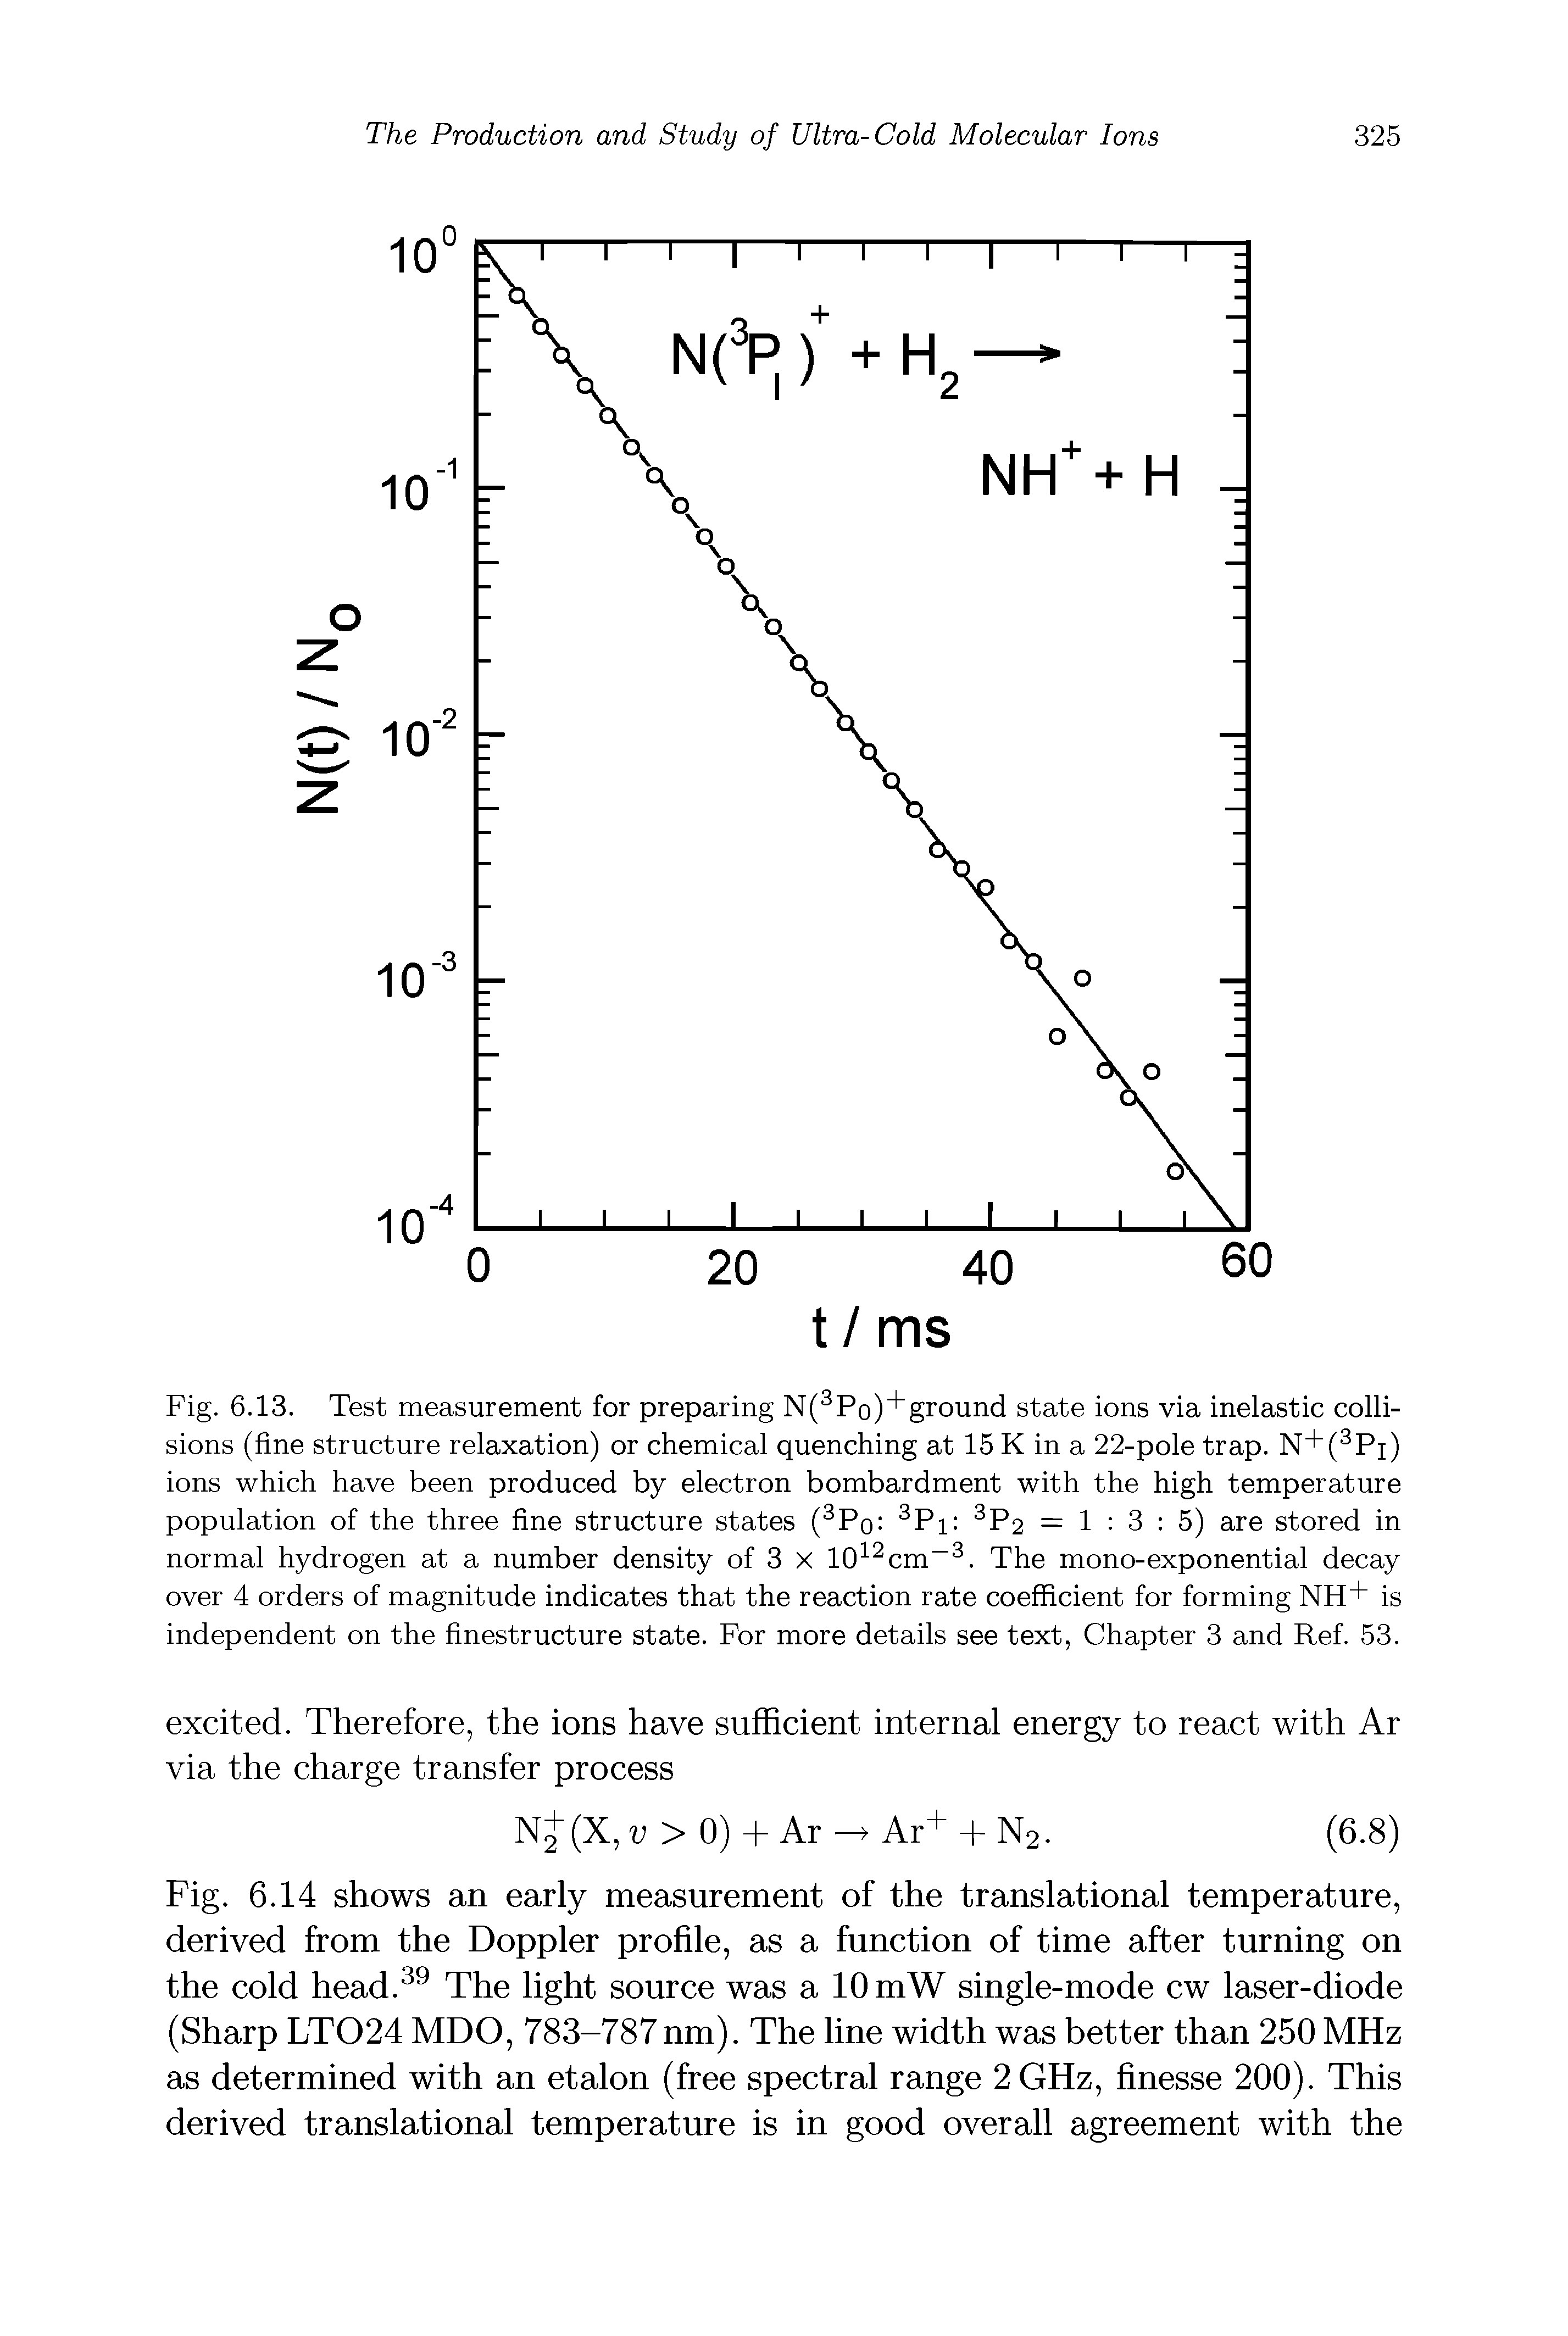 Fig. 6.13. Test measurement for preparing N( Po)+ground state ions via inelastic collisions (fine structure relaxation) or chemical quenching at 15 K in a 22-pole trap. N+( Pi) ions which have been produced by electron bombardment with the high temperature population of the three fine structure states ( Pq Pi P2 = 1 3 5) are stored in normal hydrogen at a number density of 3 X 10 cm. The mono-exponential decay over 4 orders of magnitude indicates that the reaction rate coefficient for forming NH+ is independent on the finestructure state. For more details see text, Chapter 3 and Ref. 53.